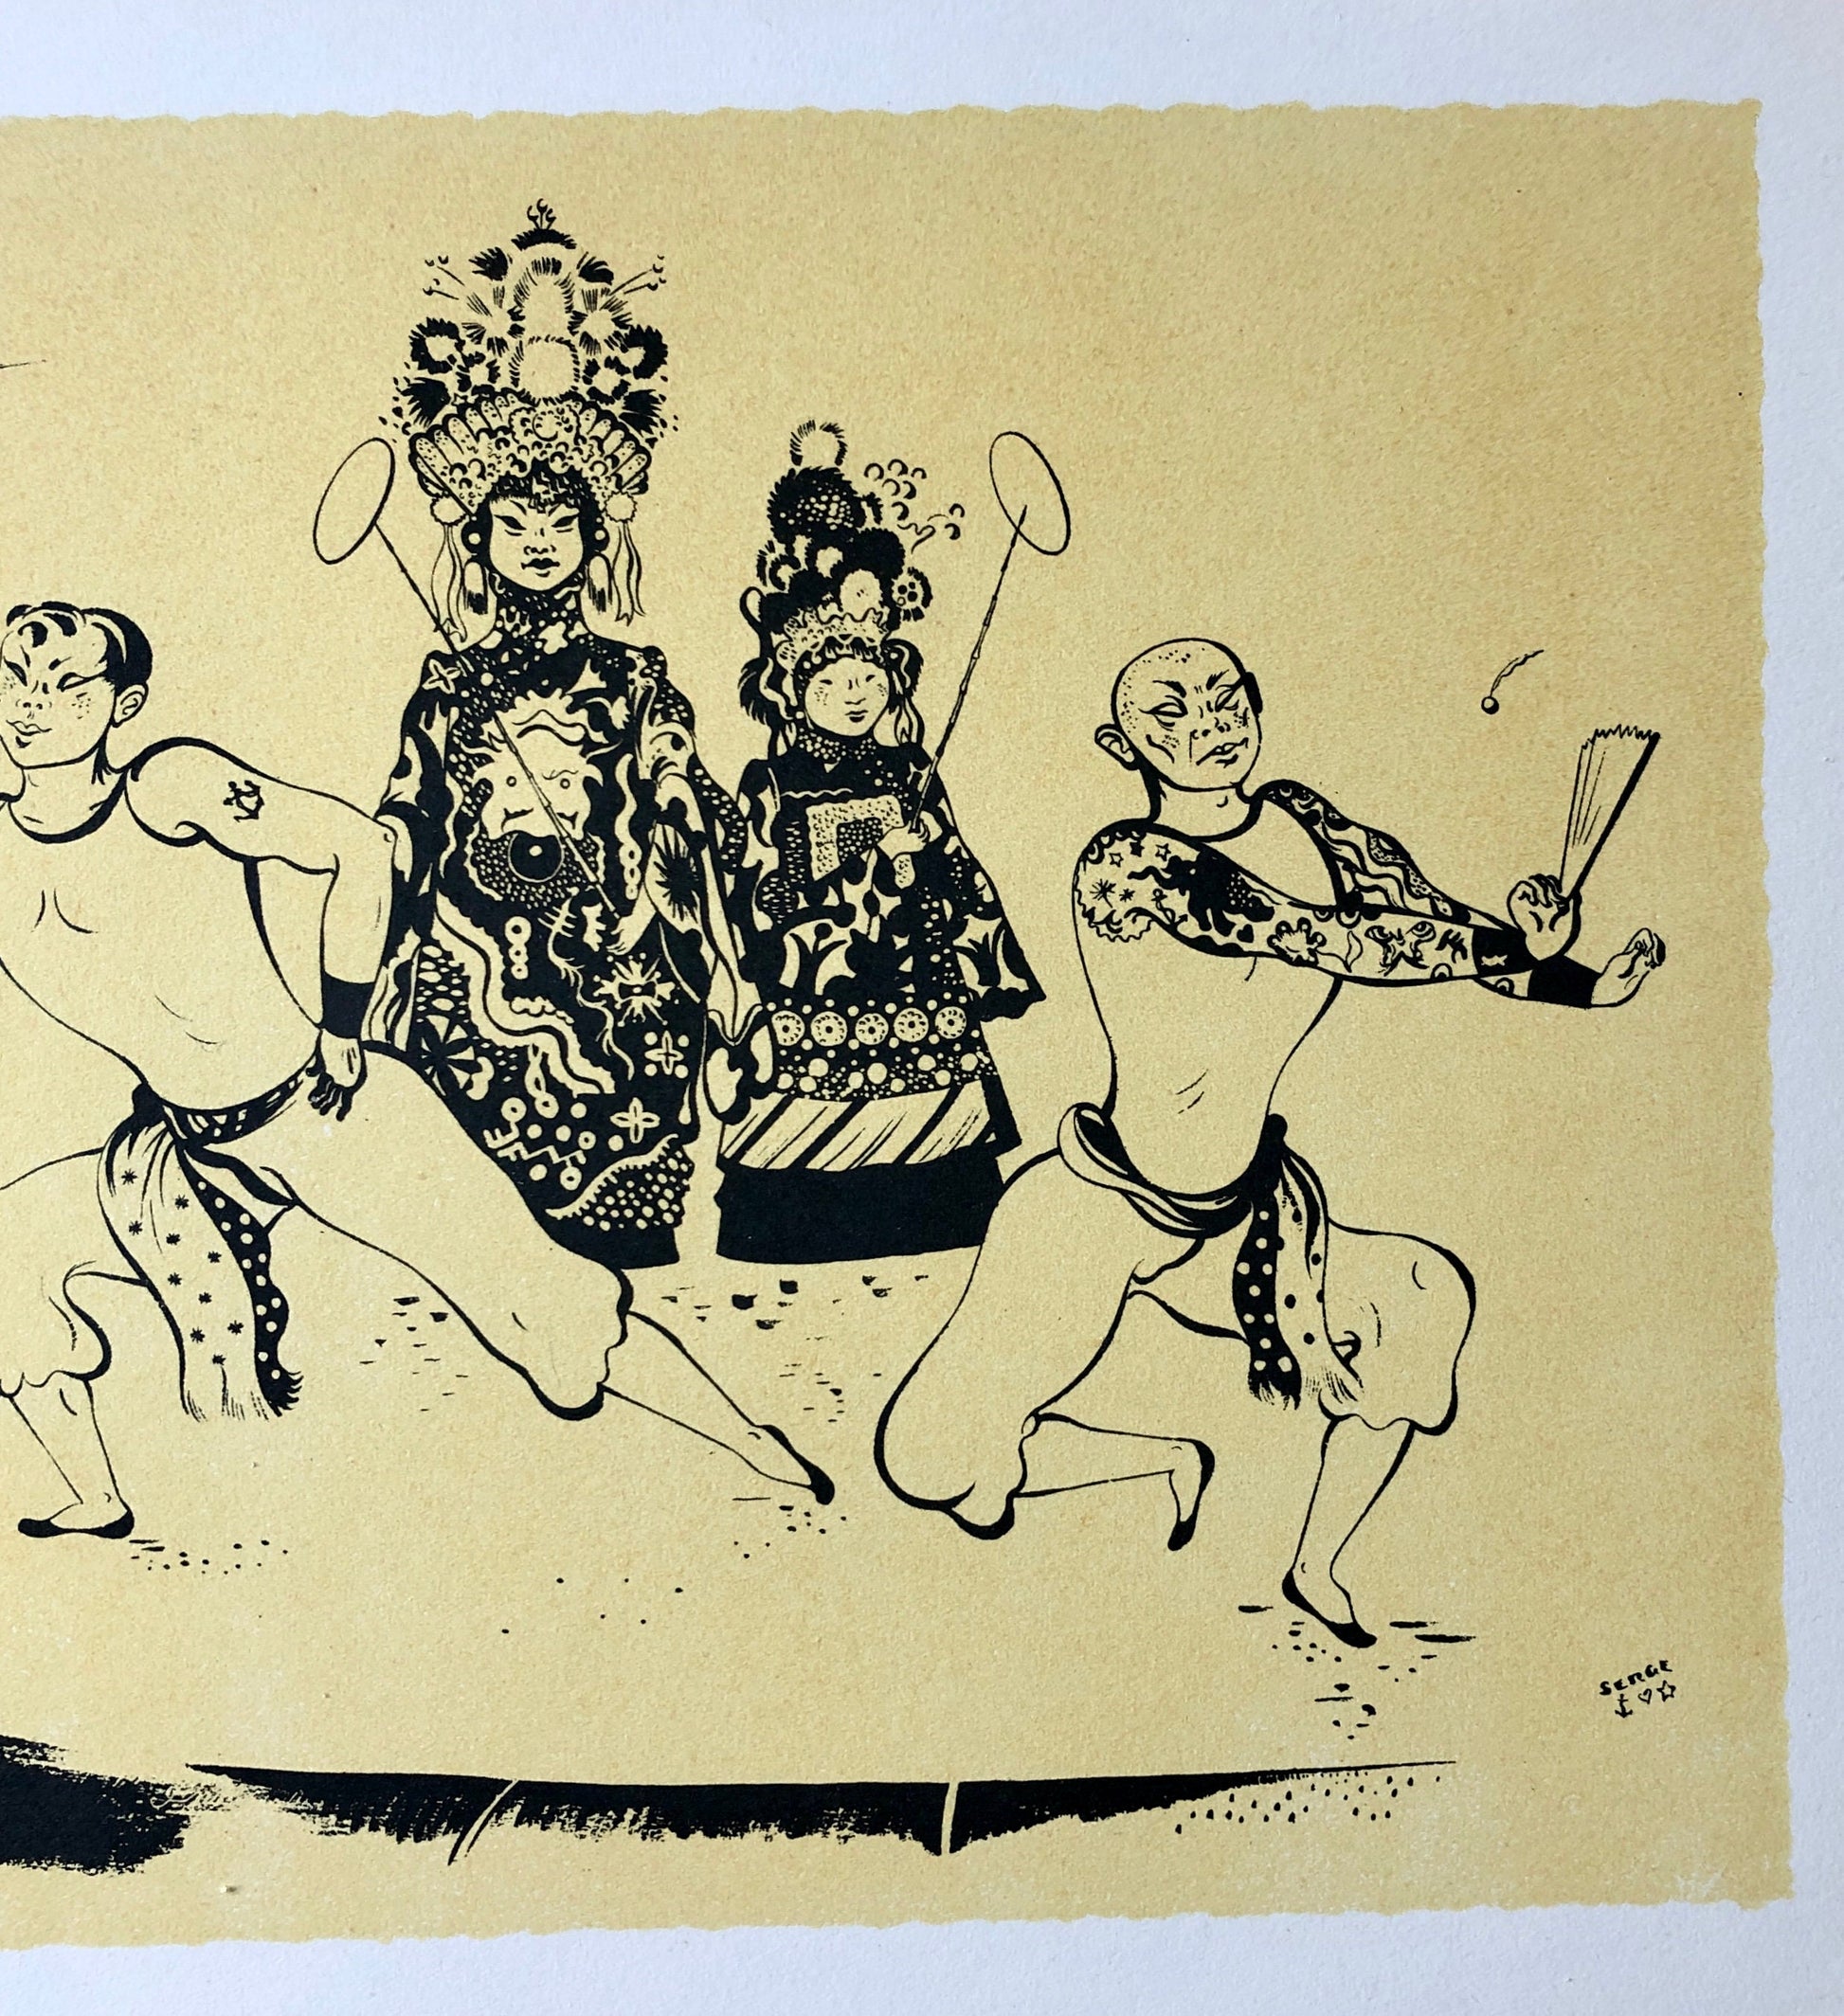 Troupe Chinoise. An Original Lithograph From The Parorama Du Cirque by Serge. One of only 1000 produced in 1944. Size: 23.8 x 29.7 cms.